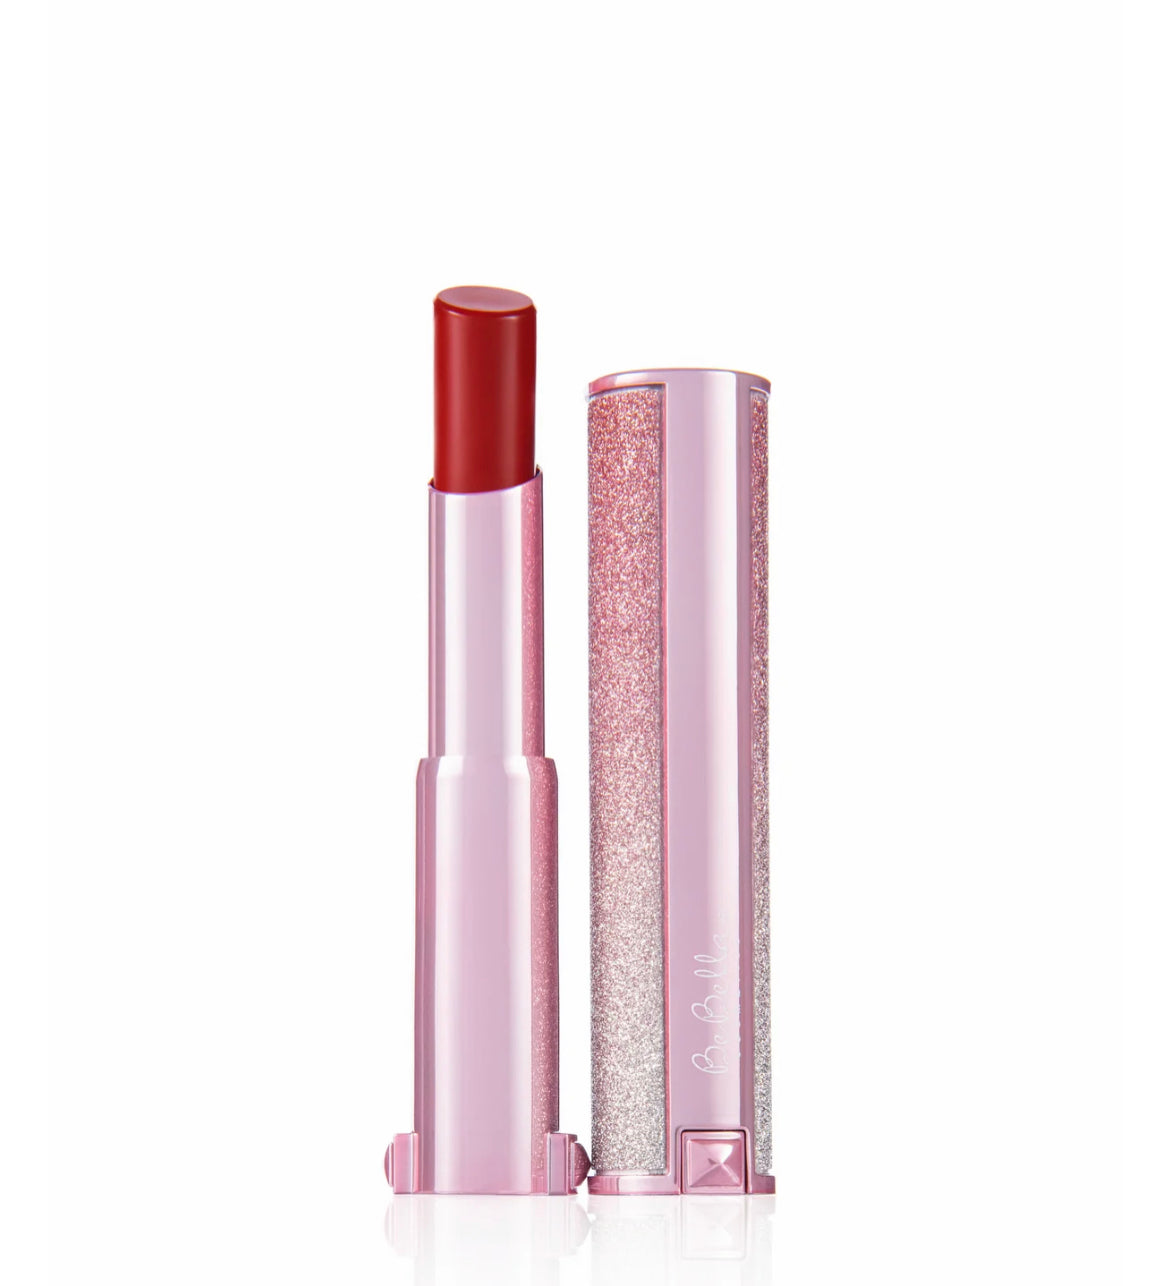 BeBella At Your Own Risk Lipstick